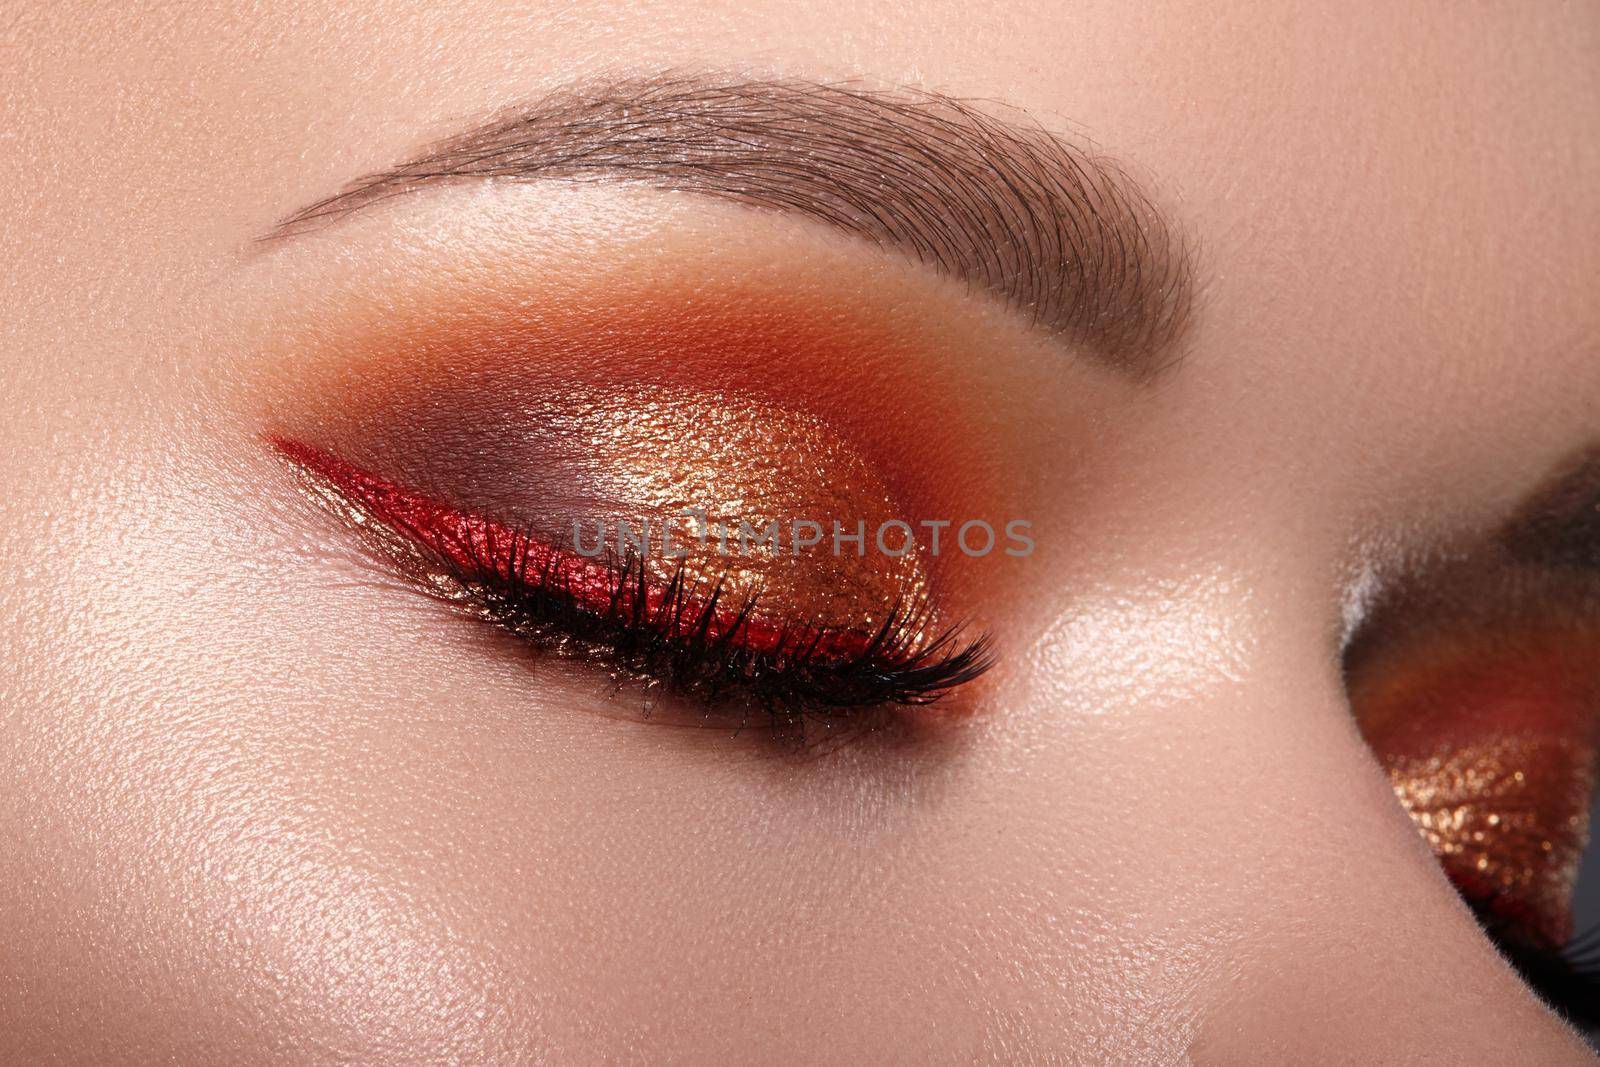 Closeup of Woman Face with Eyes Make-up. Fashion Celebrate Makeup with Red Liner, Gold Shadows, Glowy Clean Skin, perfect Shapes of Brows. Macro of Female Eye. Halloween Style